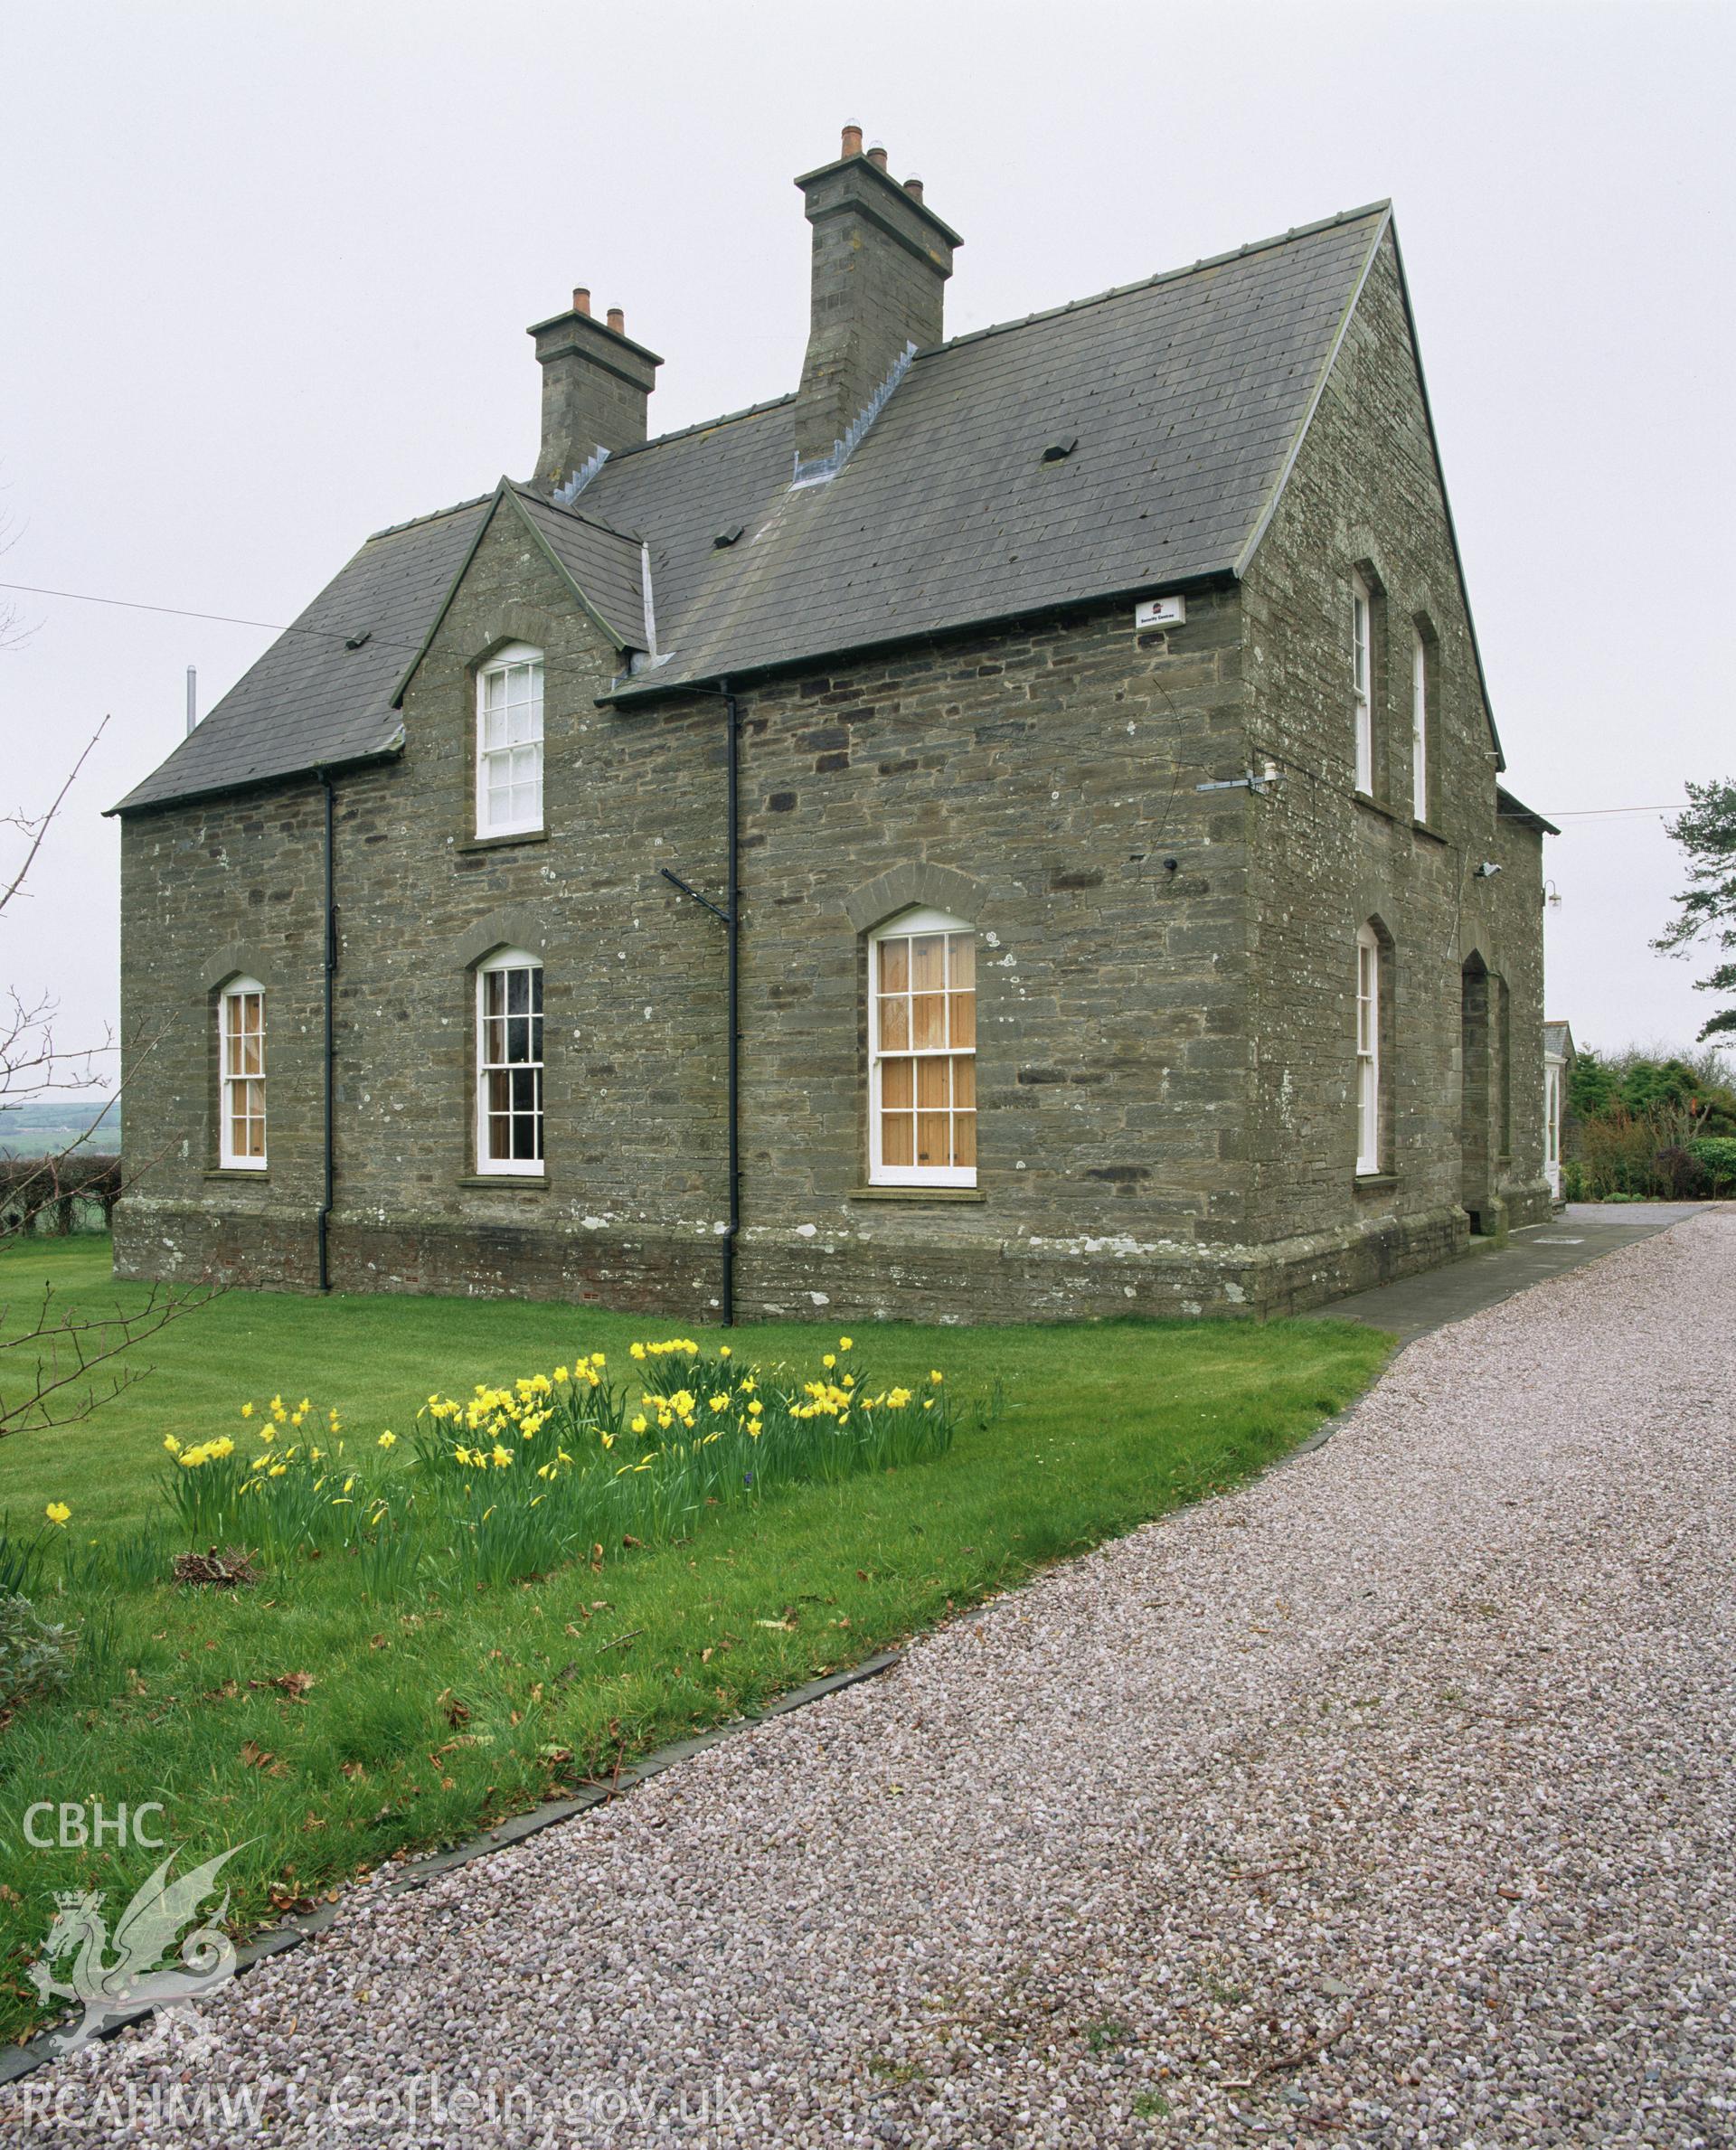 Colour transparency showing Dolcoed Vicarage, Tremain, produced by Iain Wright, June 2004.